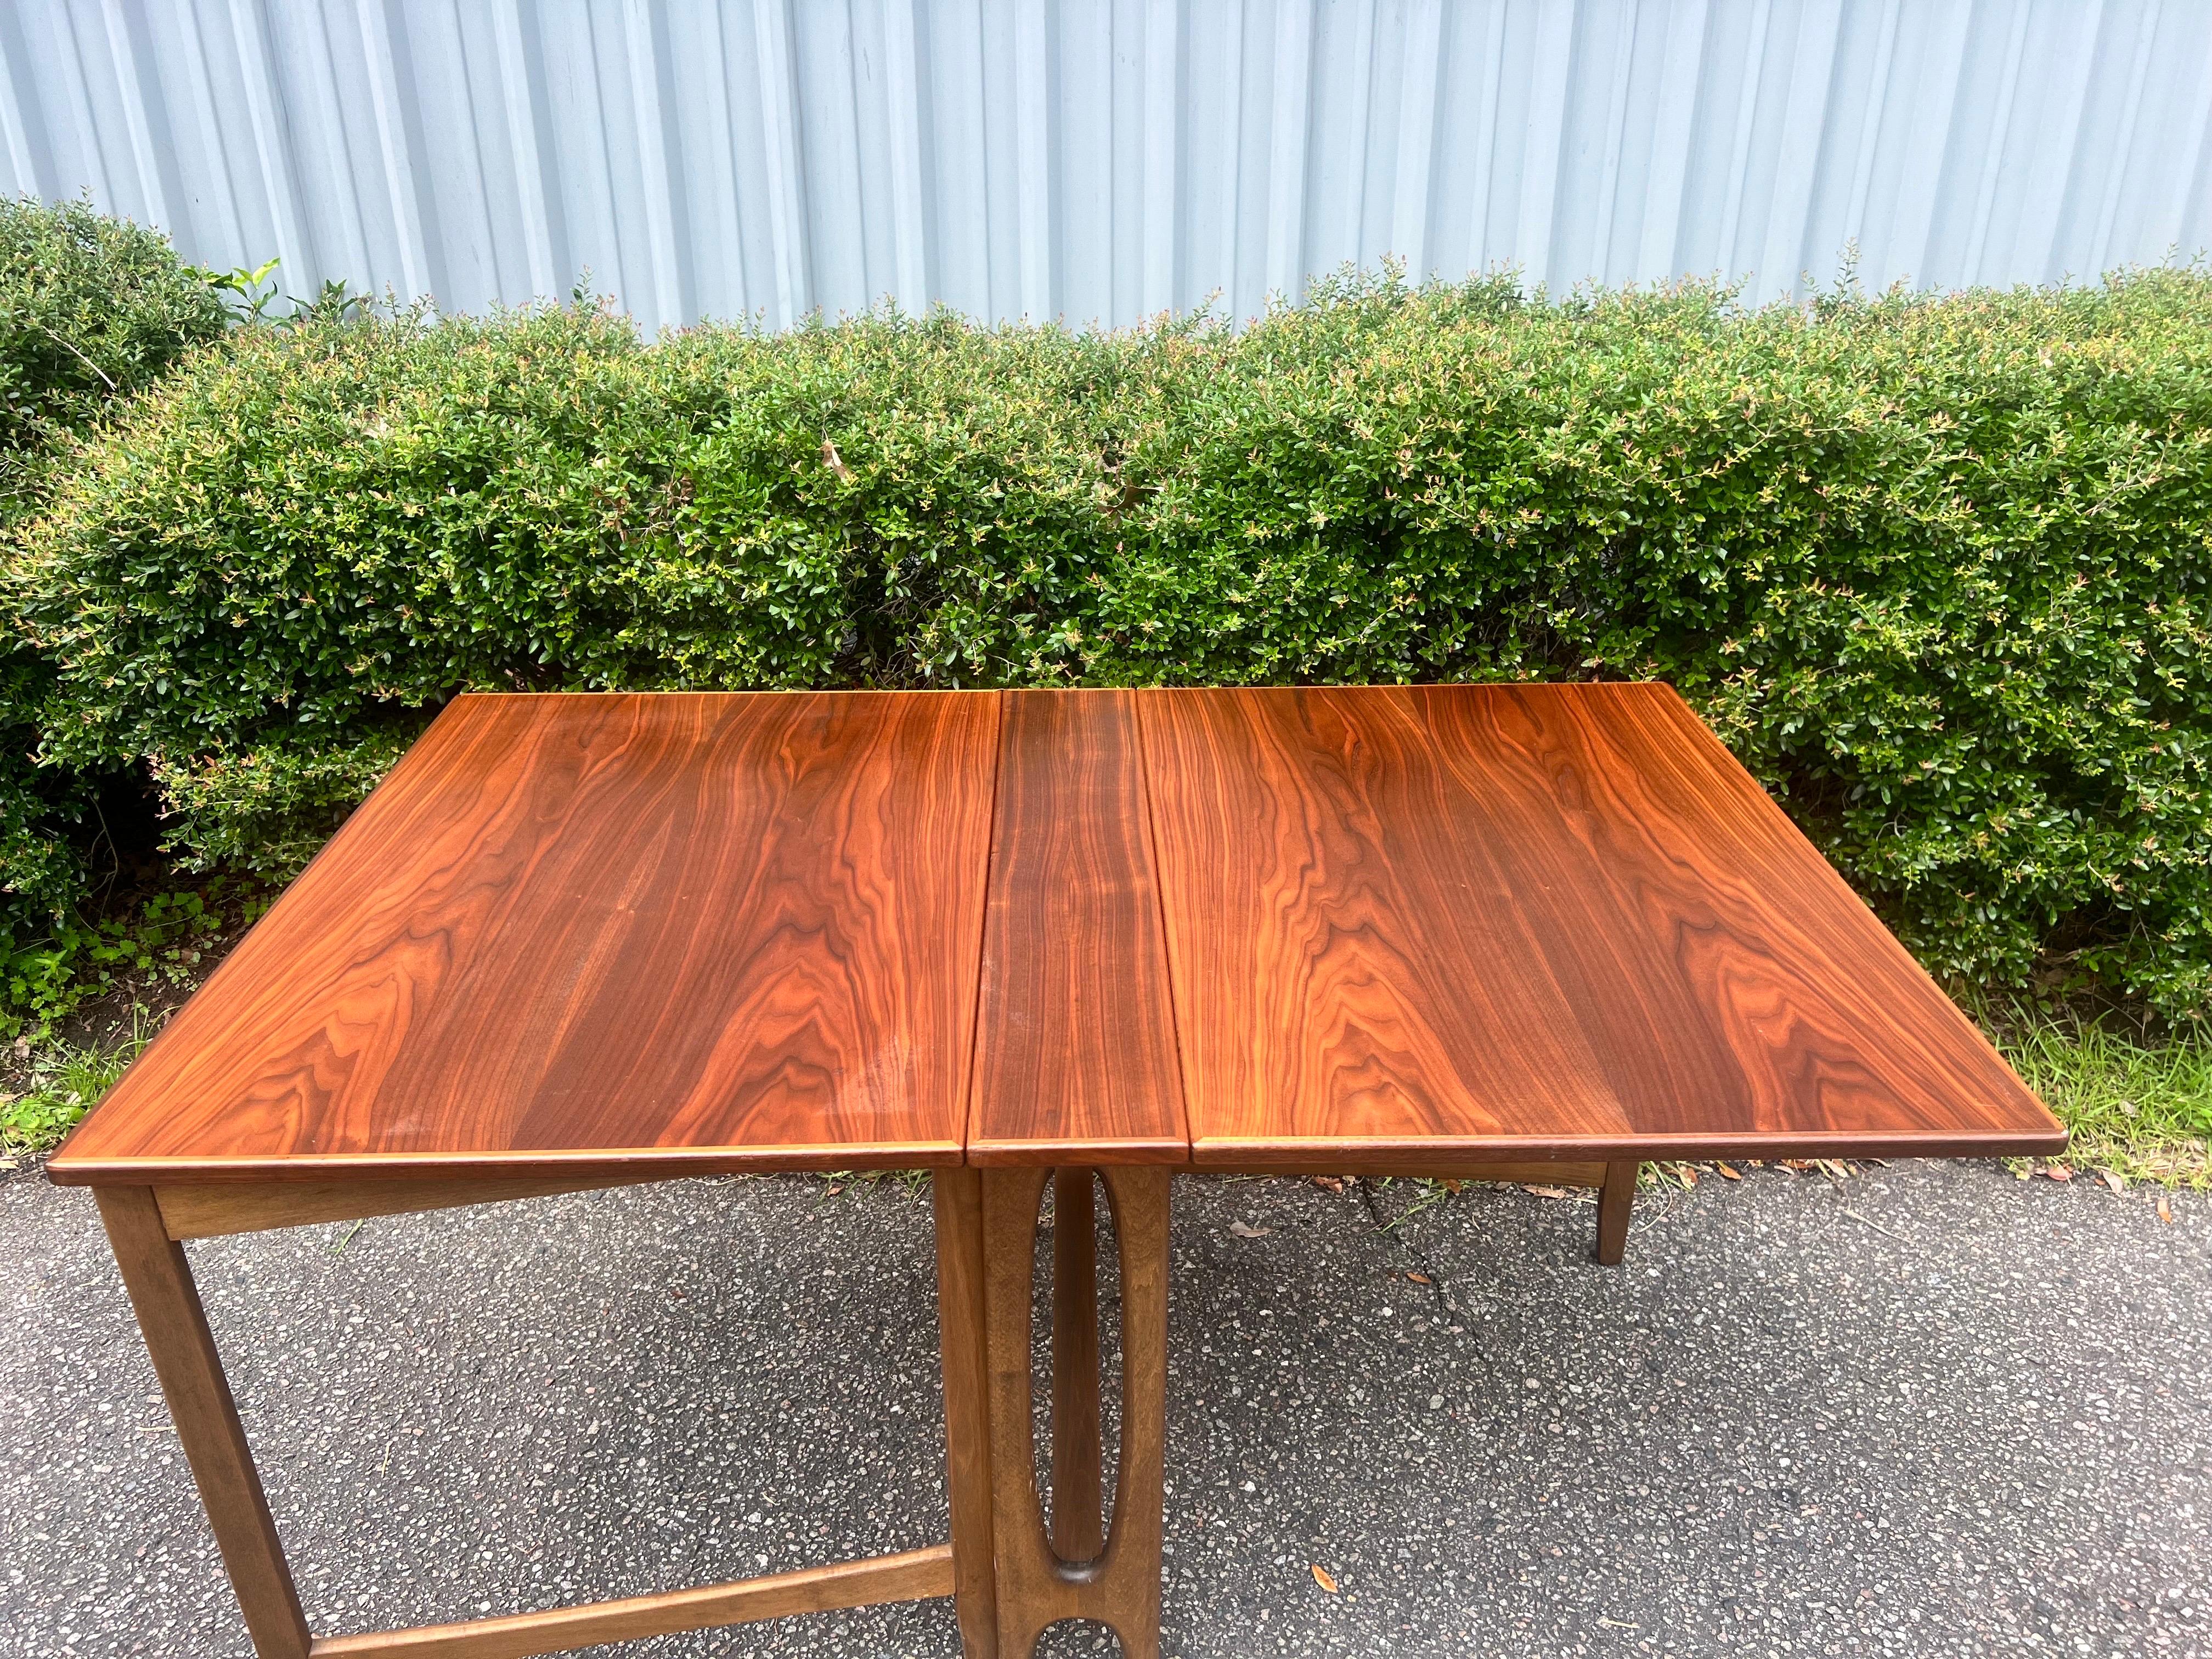 An exceptional work of Danish craftsmanship. This is an outstanding selection for serious collectors of mid century modern Danish. The leaves hang from the table, with original reinforced hinges, allowing functionality a statement to the